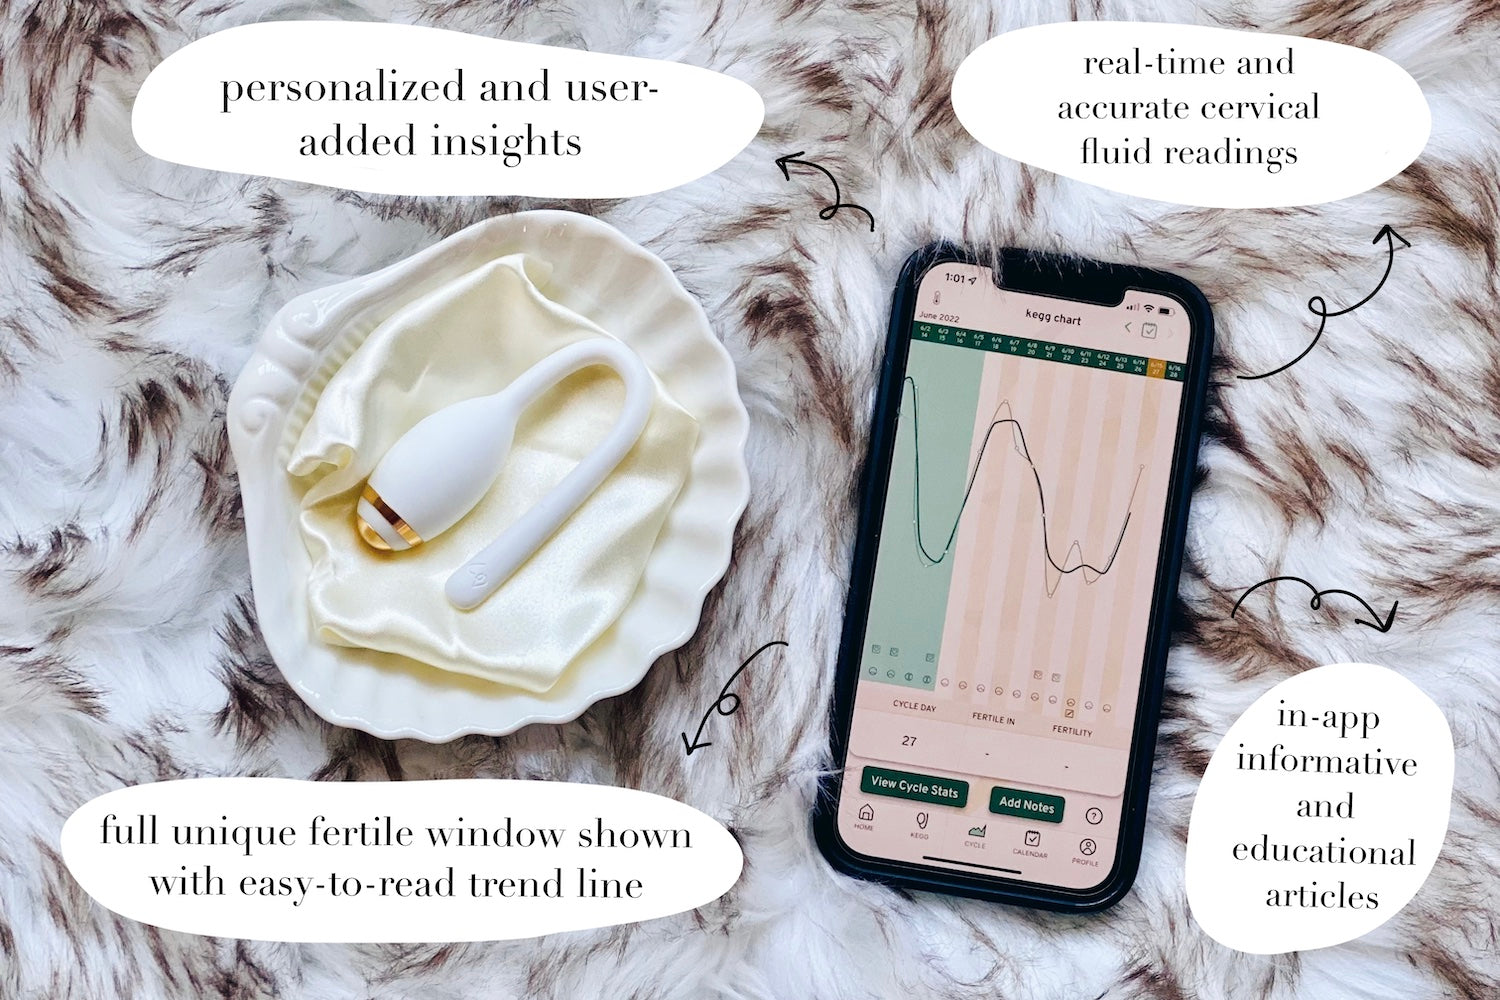 Ovulation calendars, period trackers, and kegg: How do they compare?